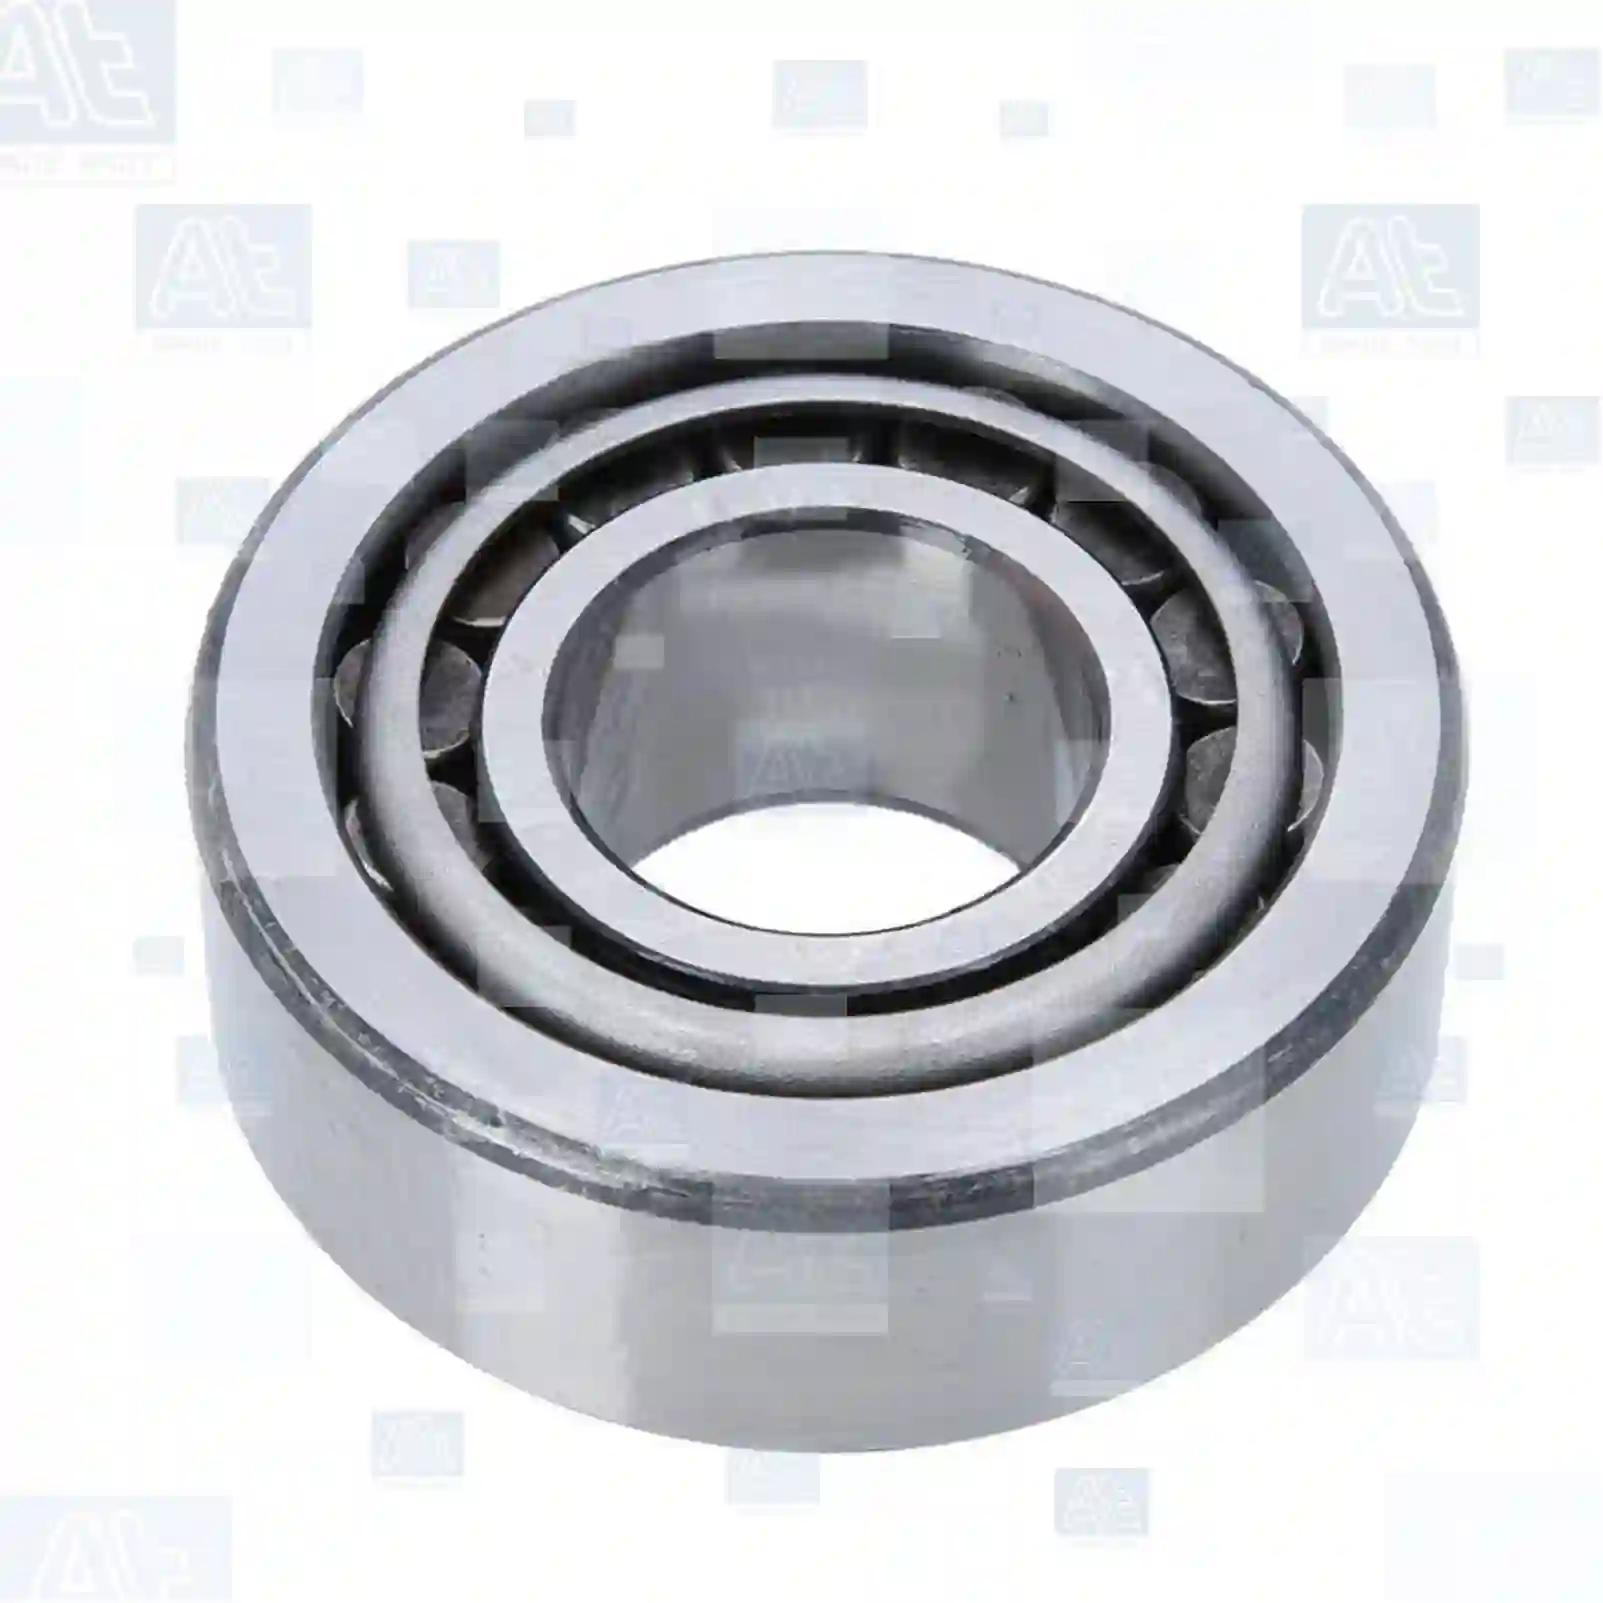 Tapered roller bearing, at no 77725208, oem no: 290063314, 0264060300, 26800560, 91124-PH8-008, 06324902800, 06324990112, 34934200002, 88934206010, A0772320600, A0773230600, 0009819505, 000720032306, 0019818305, 0019818705, 0019819505, 0069815905, 3129810205, 3129810501, 09022-0015P, 38120-13200, 38120-13201, 38120-13210, 7058598, 0023432306, 0773230680, 14614, 0009815318, 806330010, 11073, 66001044, 6601044, ZG03010-0008 At Spare Part | Engine, Accelerator Pedal, Camshaft, Connecting Rod, Crankcase, Crankshaft, Cylinder Head, Engine Suspension Mountings, Exhaust Manifold, Exhaust Gas Recirculation, Filter Kits, Flywheel Housing, General Overhaul Kits, Engine, Intake Manifold, Oil Cleaner, Oil Cooler, Oil Filter, Oil Pump, Oil Sump, Piston & Liner, Sensor & Switch, Timing Case, Turbocharger, Cooling System, Belt Tensioner, Coolant Filter, Coolant Pipe, Corrosion Prevention Agent, Drive, Expansion Tank, Fan, Intercooler, Monitors & Gauges, Radiator, Thermostat, V-Belt / Timing belt, Water Pump, Fuel System, Electronical Injector Unit, Feed Pump, Fuel Filter, cpl., Fuel Gauge Sender,  Fuel Line, Fuel Pump, Fuel Tank, Injection Line Kit, Injection Pump, Exhaust System, Clutch & Pedal, Gearbox, Propeller Shaft, Axles, Brake System, Hubs & Wheels, Suspension, Leaf Spring, Universal Parts / Accessories, Steering, Electrical System, Cabin Tapered roller bearing, at no 77725208, oem no: 290063314, 0264060300, 26800560, 91124-PH8-008, 06324902800, 06324990112, 34934200002, 88934206010, A0772320600, A0773230600, 0009819505, 000720032306, 0019818305, 0019818705, 0019819505, 0069815905, 3129810205, 3129810501, 09022-0015P, 38120-13200, 38120-13201, 38120-13210, 7058598, 0023432306, 0773230680, 14614, 0009815318, 806330010, 11073, 66001044, 6601044, ZG03010-0008 At Spare Part | Engine, Accelerator Pedal, Camshaft, Connecting Rod, Crankcase, Crankshaft, Cylinder Head, Engine Suspension Mountings, Exhaust Manifold, Exhaust Gas Recirculation, Filter Kits, Flywheel Housing, General Overhaul Kits, Engine, Intake Manifold, Oil Cleaner, Oil Cooler, Oil Filter, Oil Pump, Oil Sump, Piston & Liner, Sensor & Switch, Timing Case, Turbocharger, Cooling System, Belt Tensioner, Coolant Filter, Coolant Pipe, Corrosion Prevention Agent, Drive, Expansion Tank, Fan, Intercooler, Monitors & Gauges, Radiator, Thermostat, V-Belt / Timing belt, Water Pump, Fuel System, Electronical Injector Unit, Feed Pump, Fuel Filter, cpl., Fuel Gauge Sender,  Fuel Line, Fuel Pump, Fuel Tank, Injection Line Kit, Injection Pump, Exhaust System, Clutch & Pedal, Gearbox, Propeller Shaft, Axles, Brake System, Hubs & Wheels, Suspension, Leaf Spring, Universal Parts / Accessories, Steering, Electrical System, Cabin